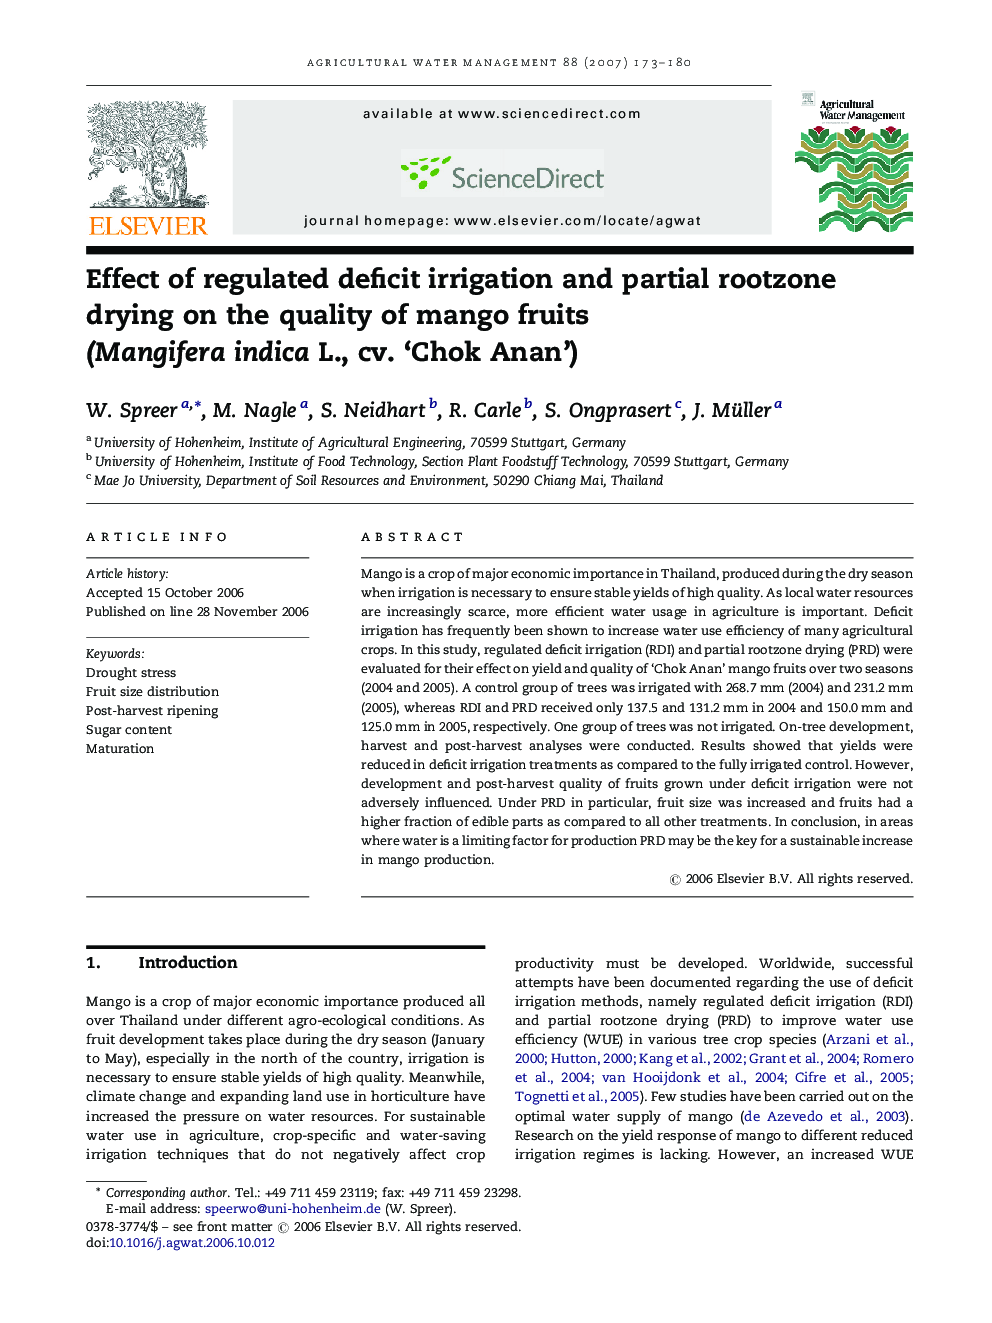 Effect of regulated deficit irrigation and partial rootzone drying on the quality of mango fruits (Mangifera indica L., cv. ‘Chok Anan’)